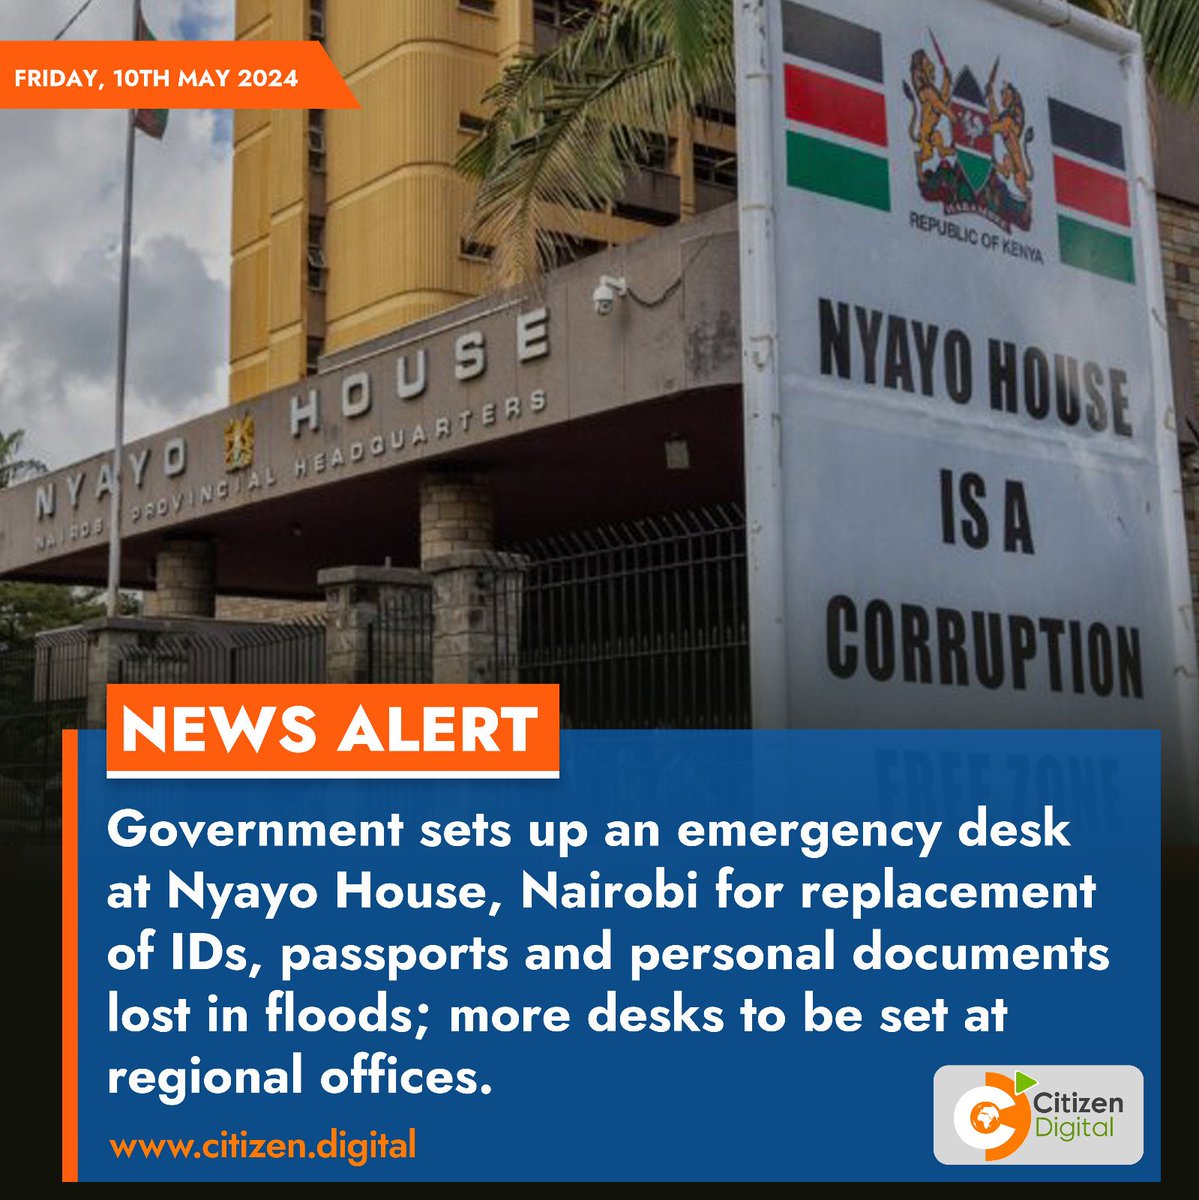 Government sets up an emergency desk at Nyayo House, Nairobi for replacement of IDs, passports and personal documents lost in floods; more desks to be set at regional offices.